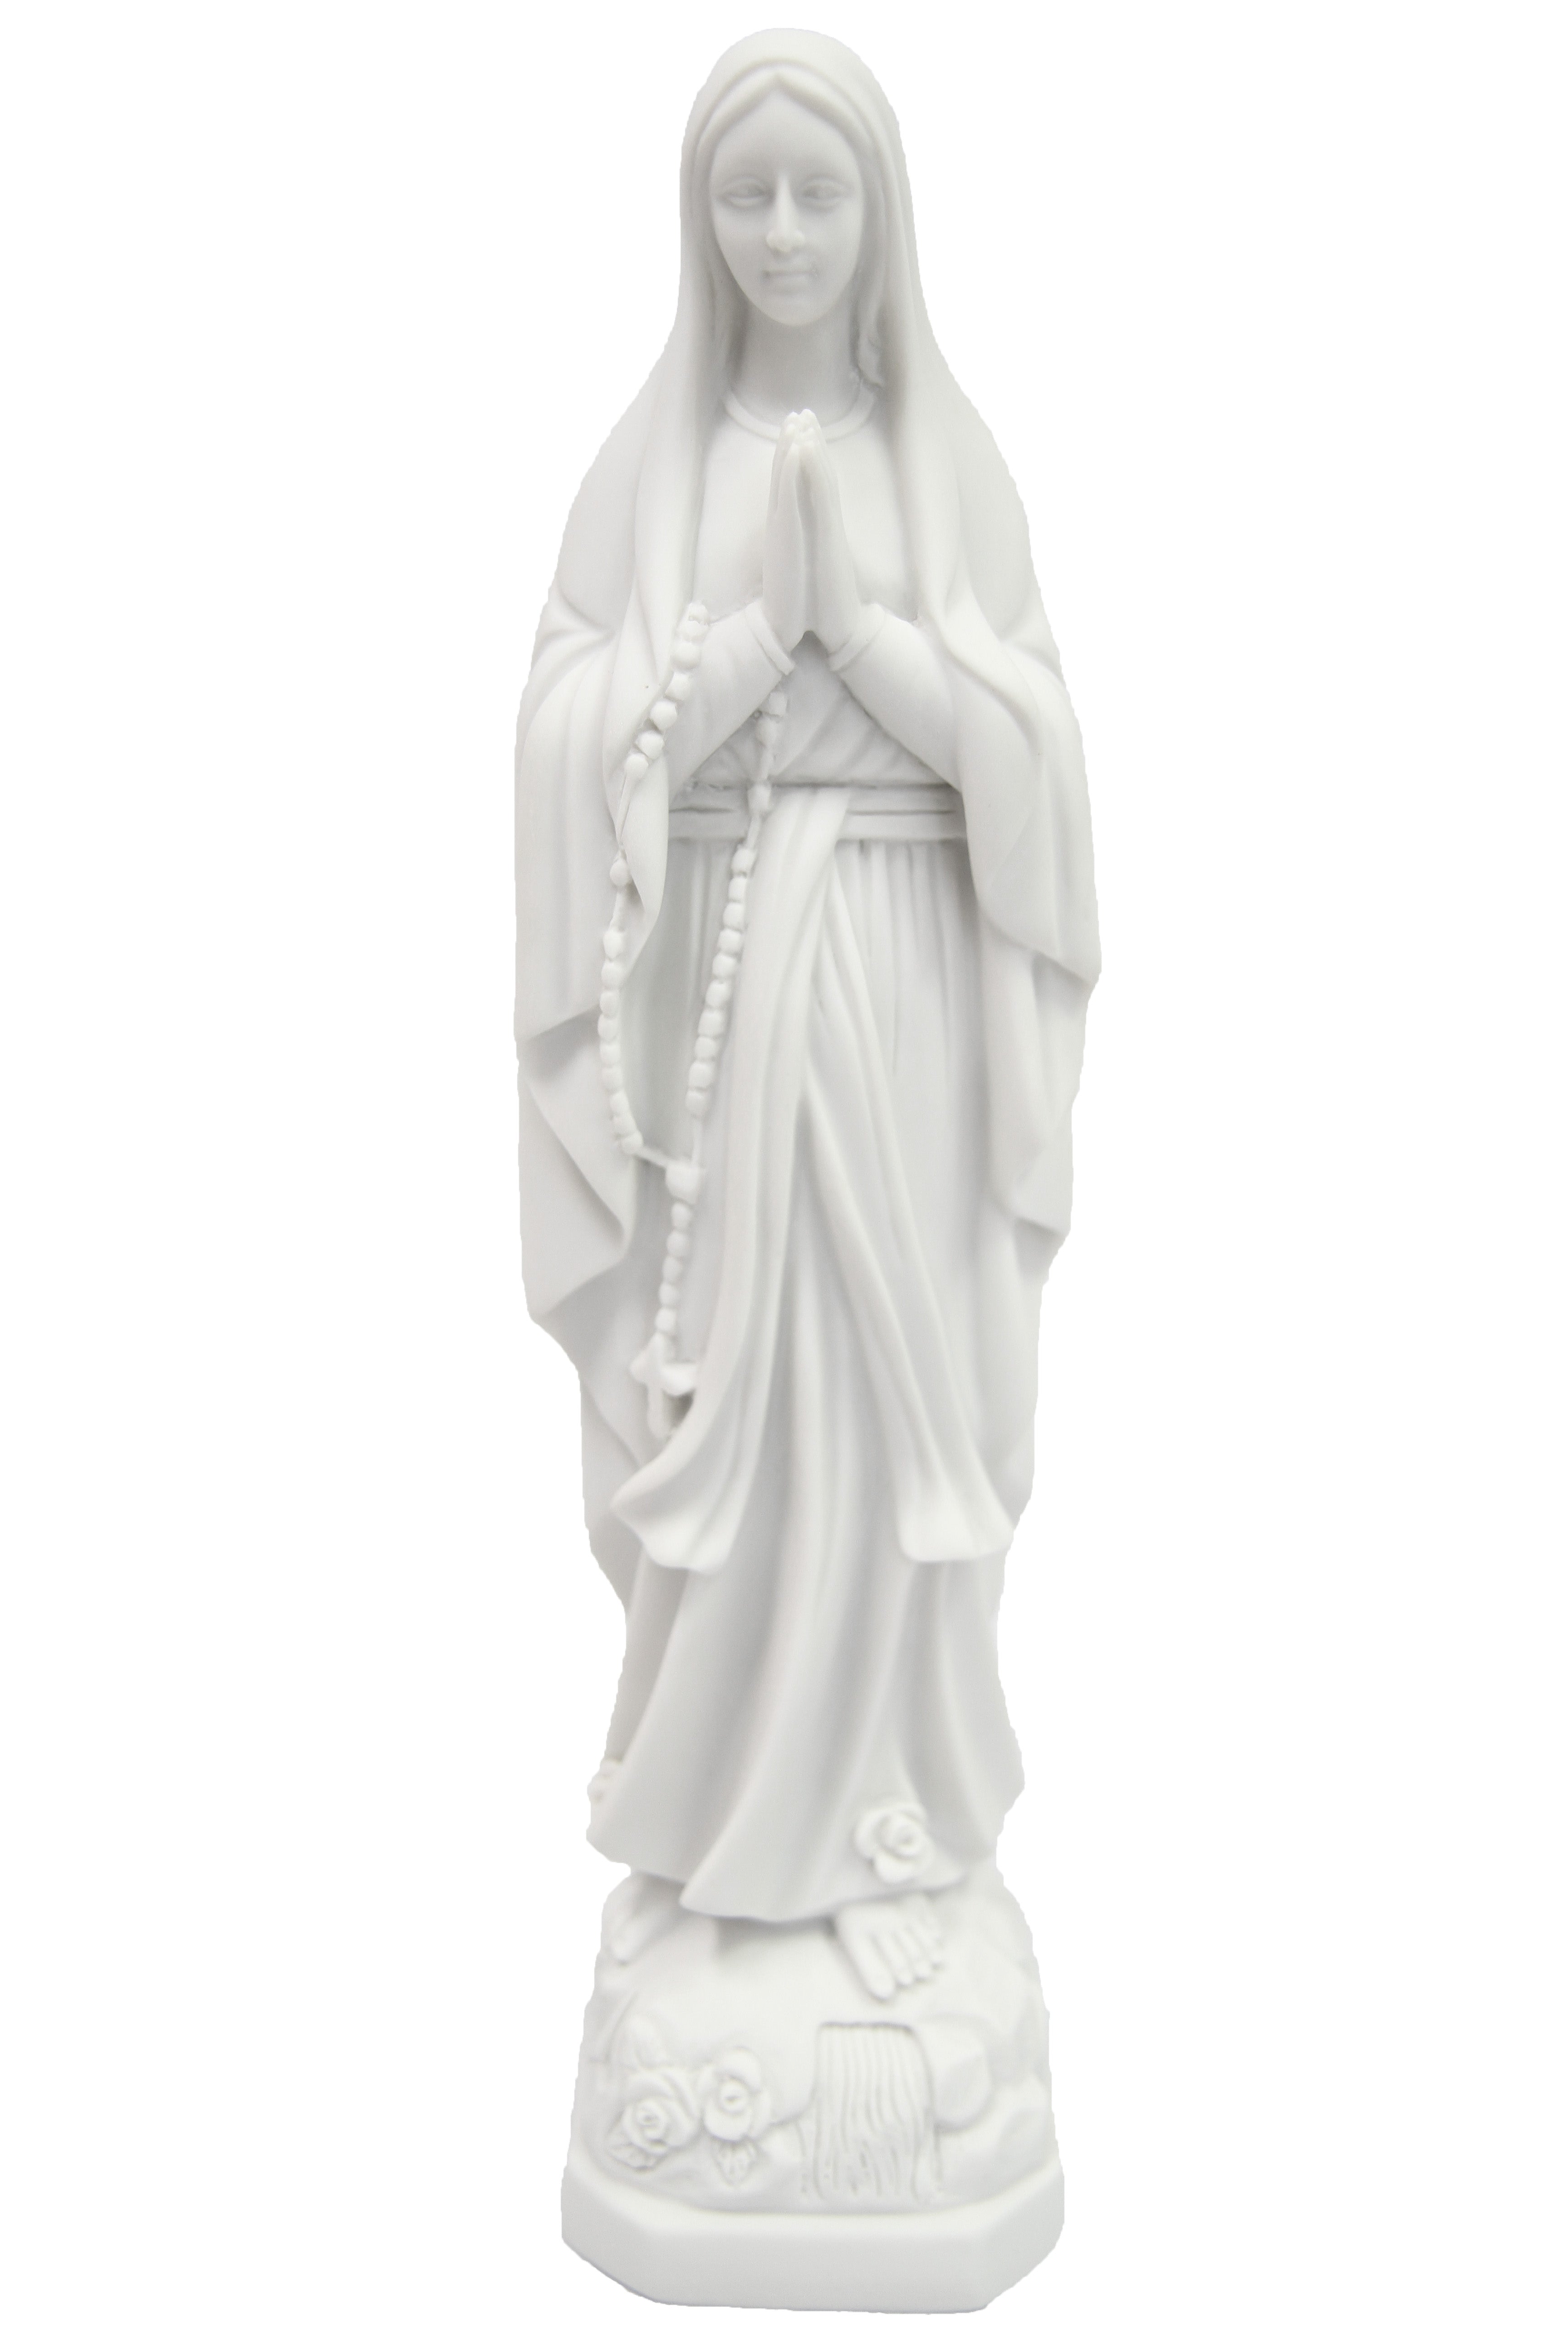 11.5 Inch Our Lady of Lourdes Virgin Mary Catholic Statue Vittoria Collection Made in Italy